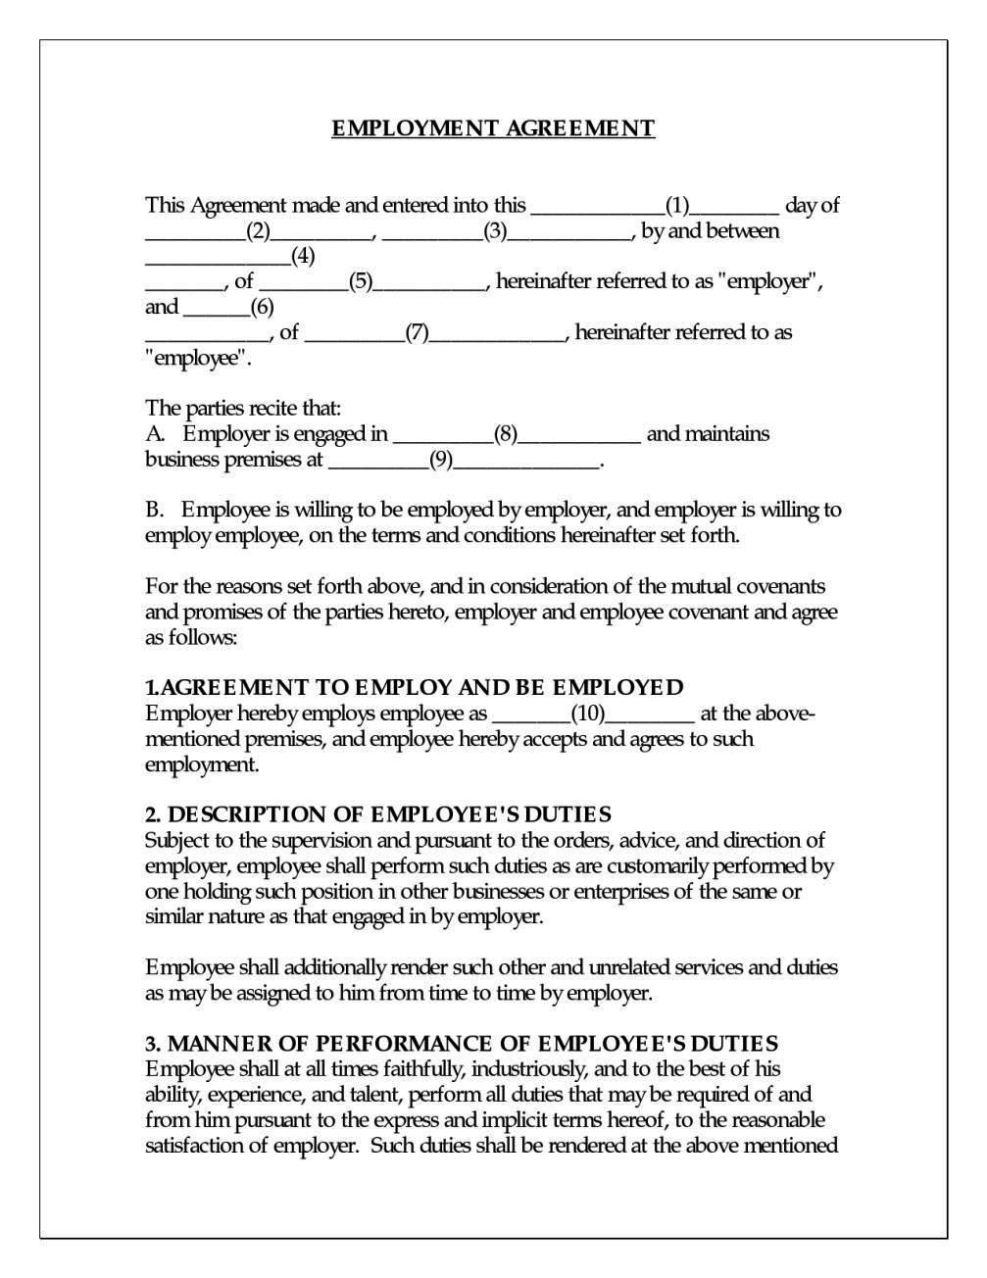 Temporary employment contract template pdf